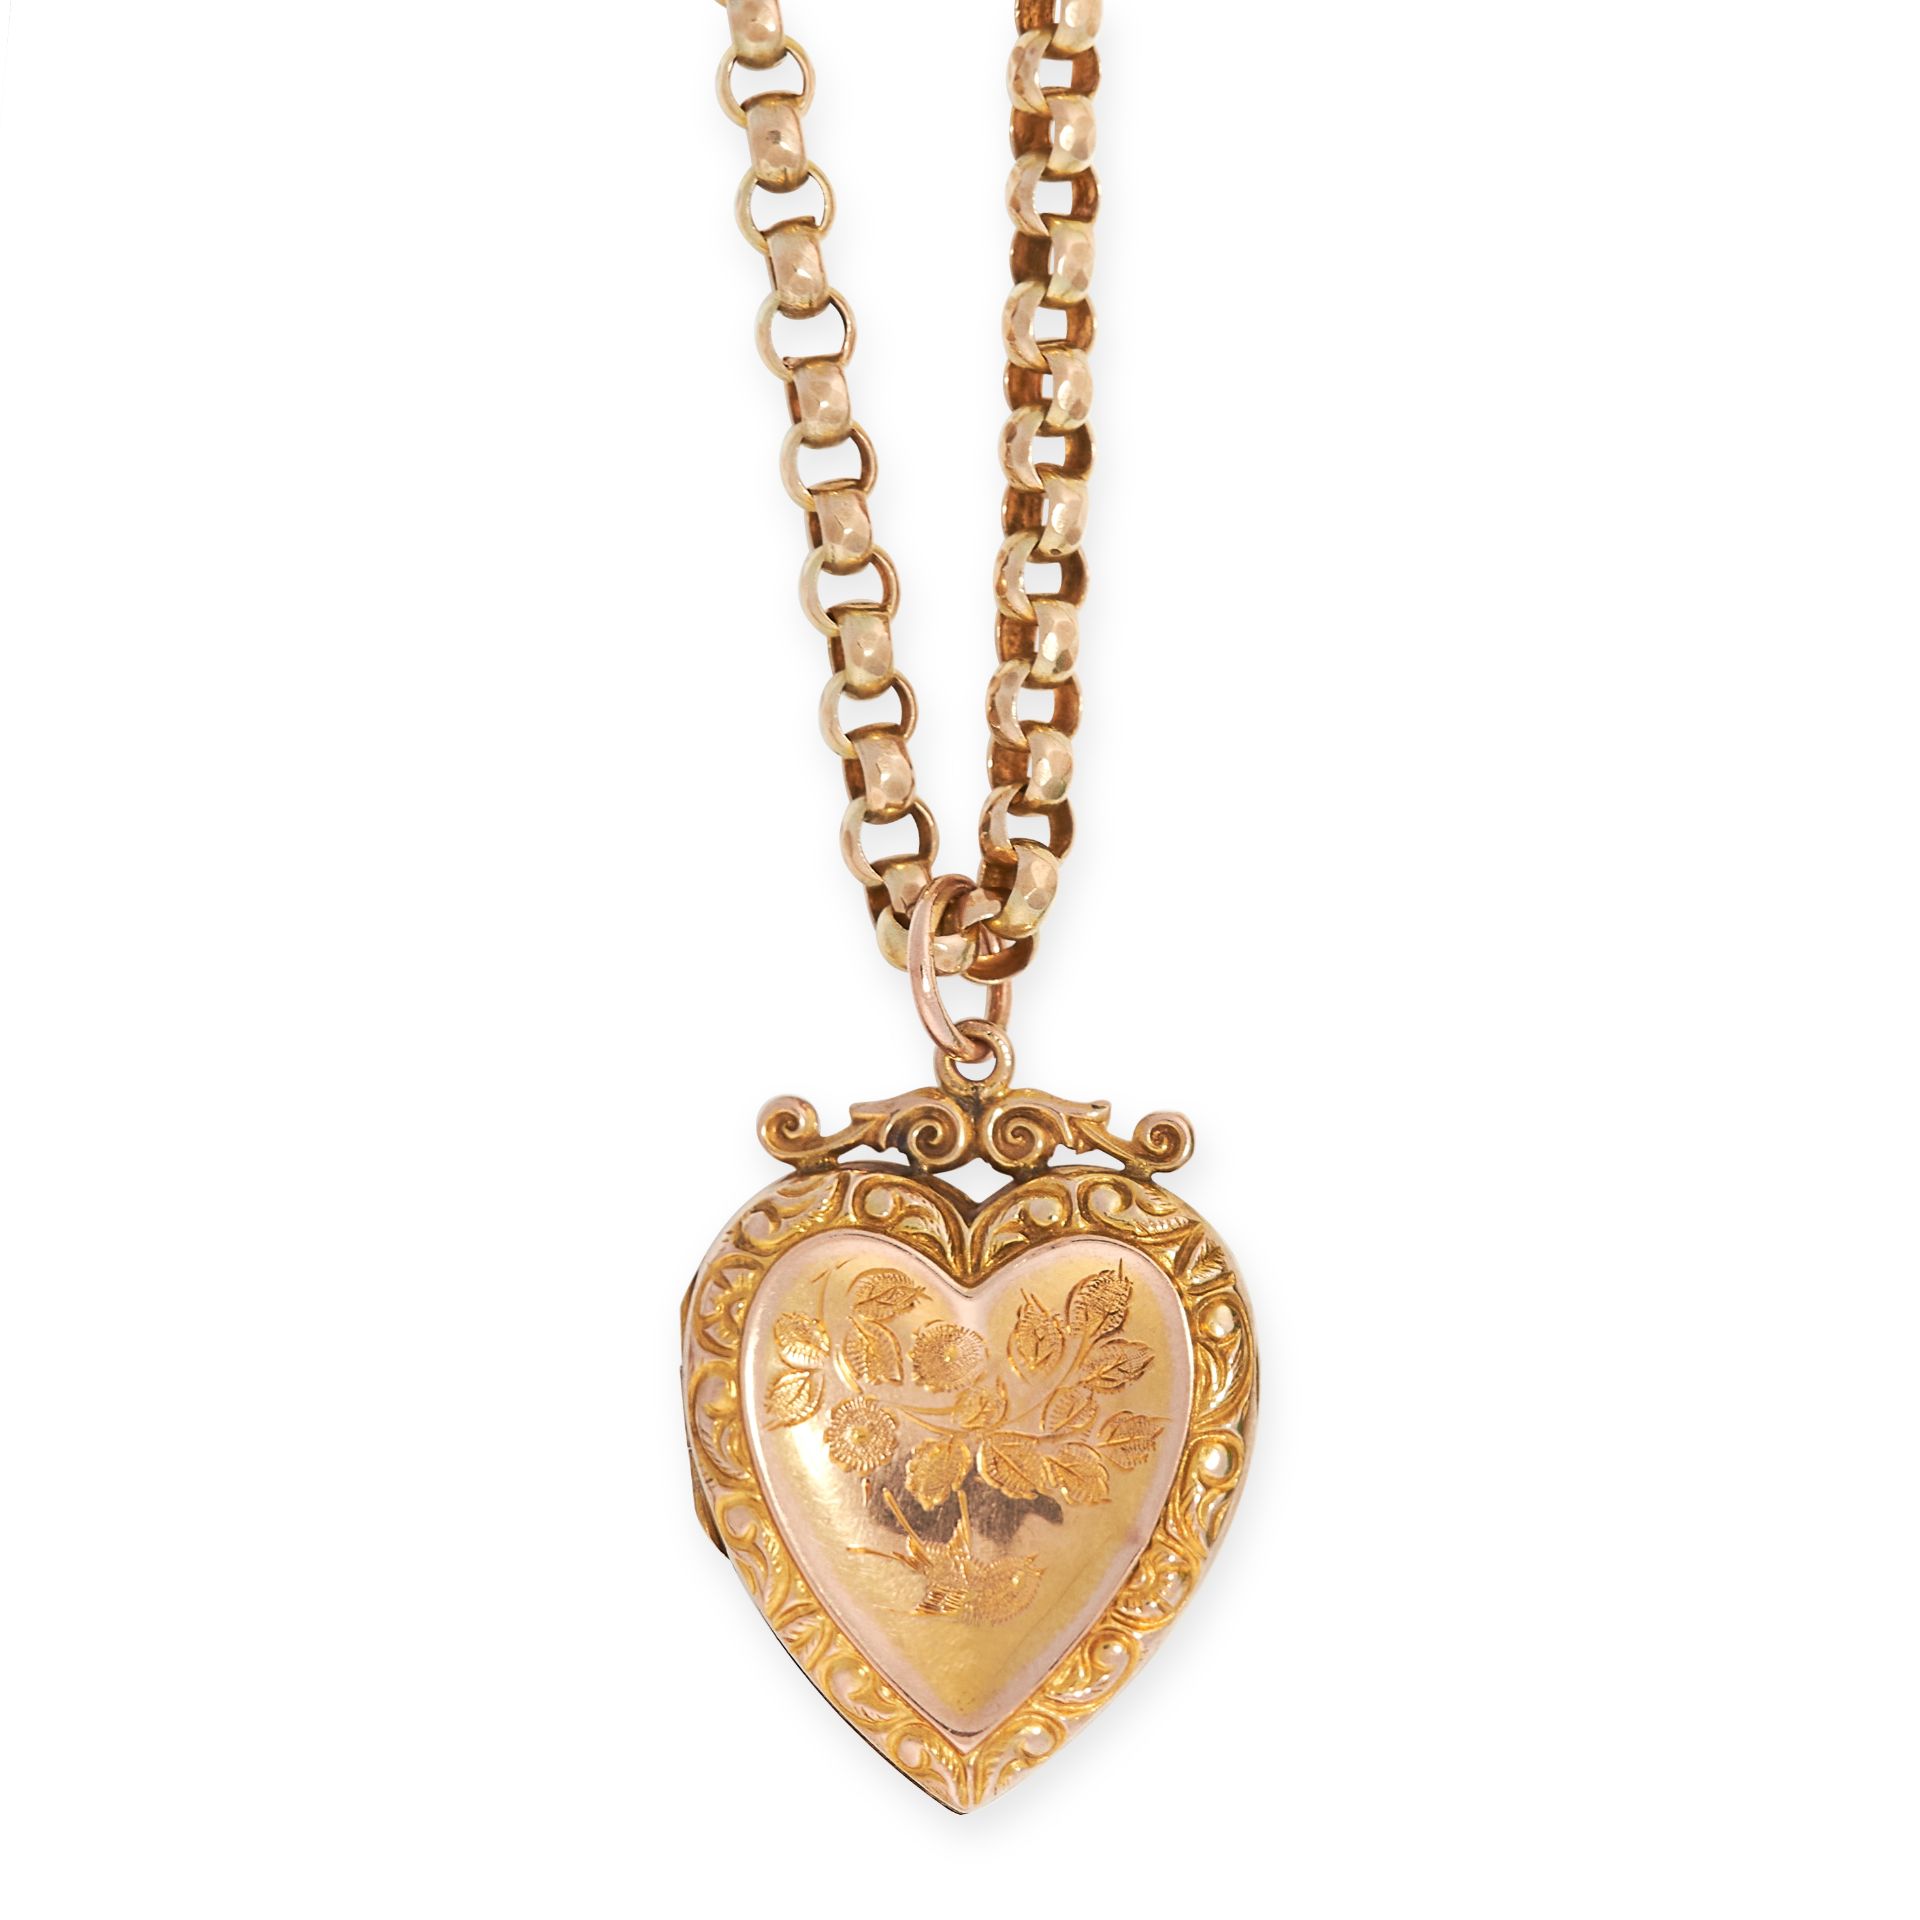 AN ANTIQUE LOCKET PENDANT AND CHAIN the hinged heart shaped body with chased and engraved foliate